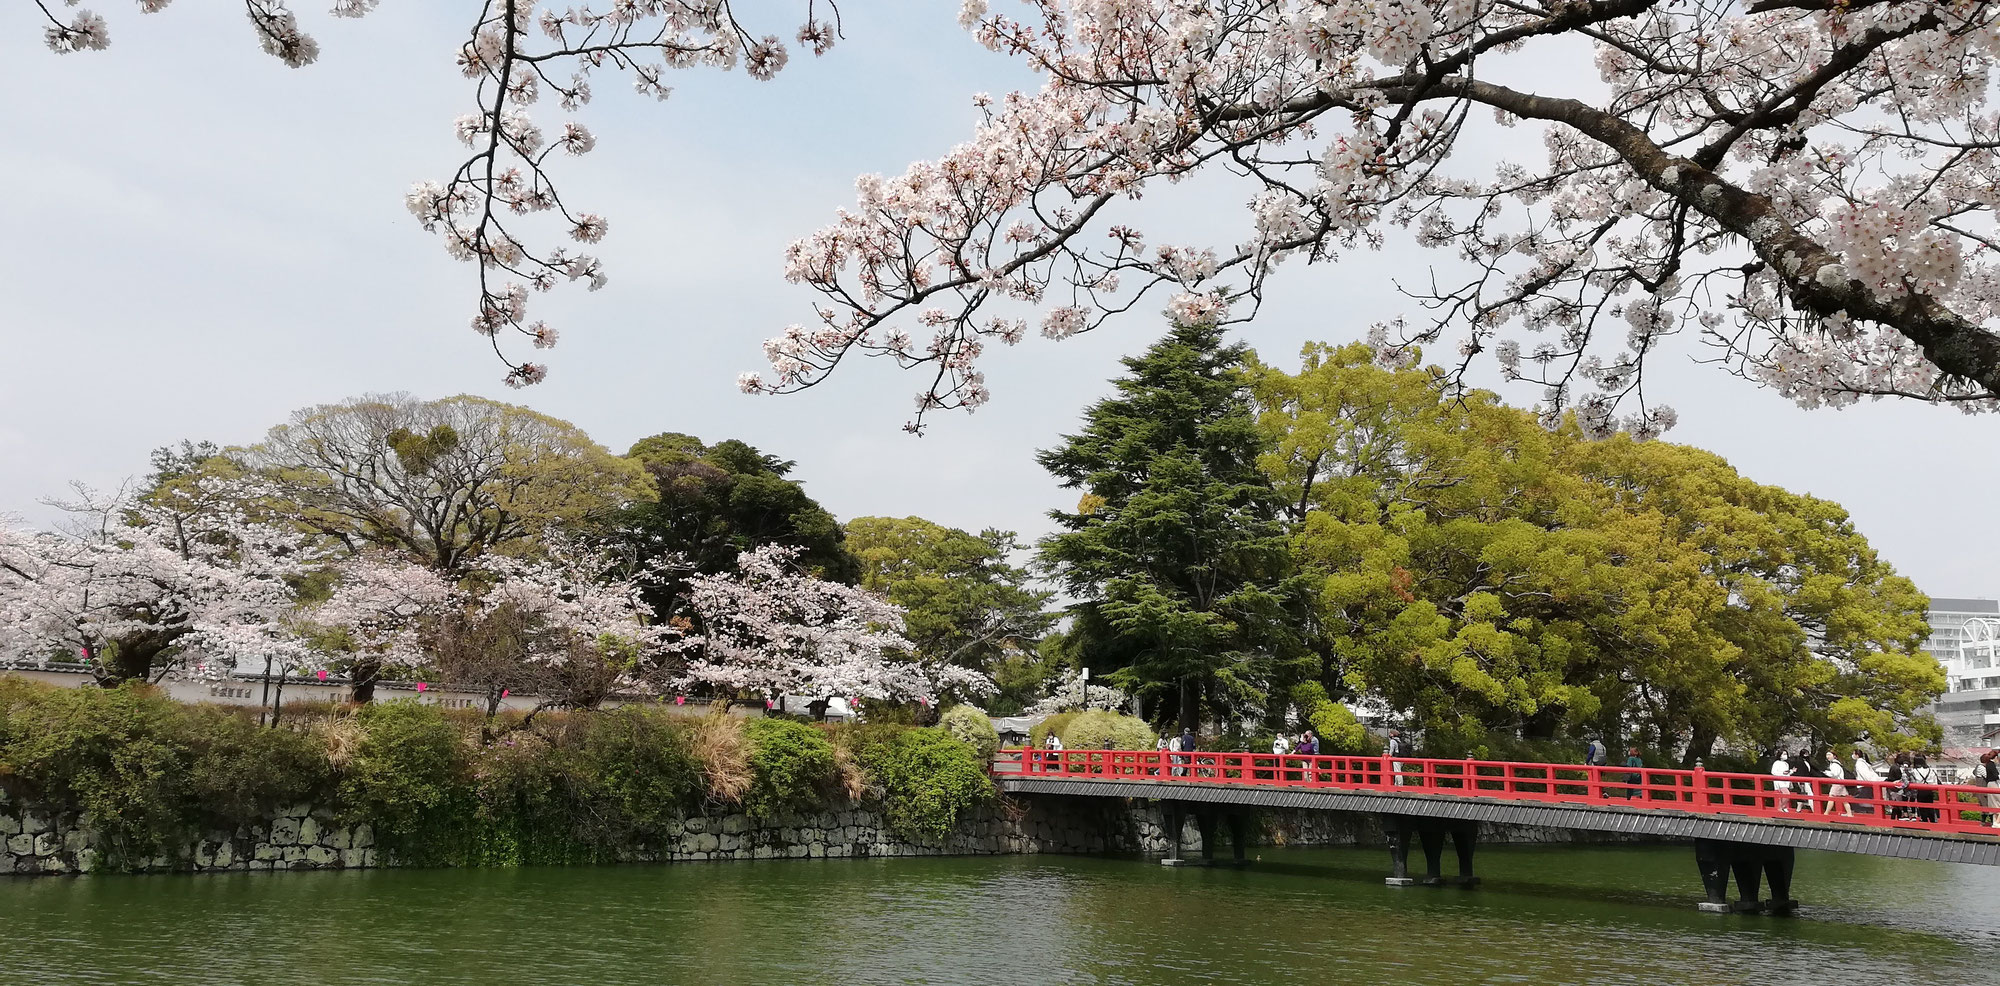 Cherry blossom culture for Japanese people, Part II